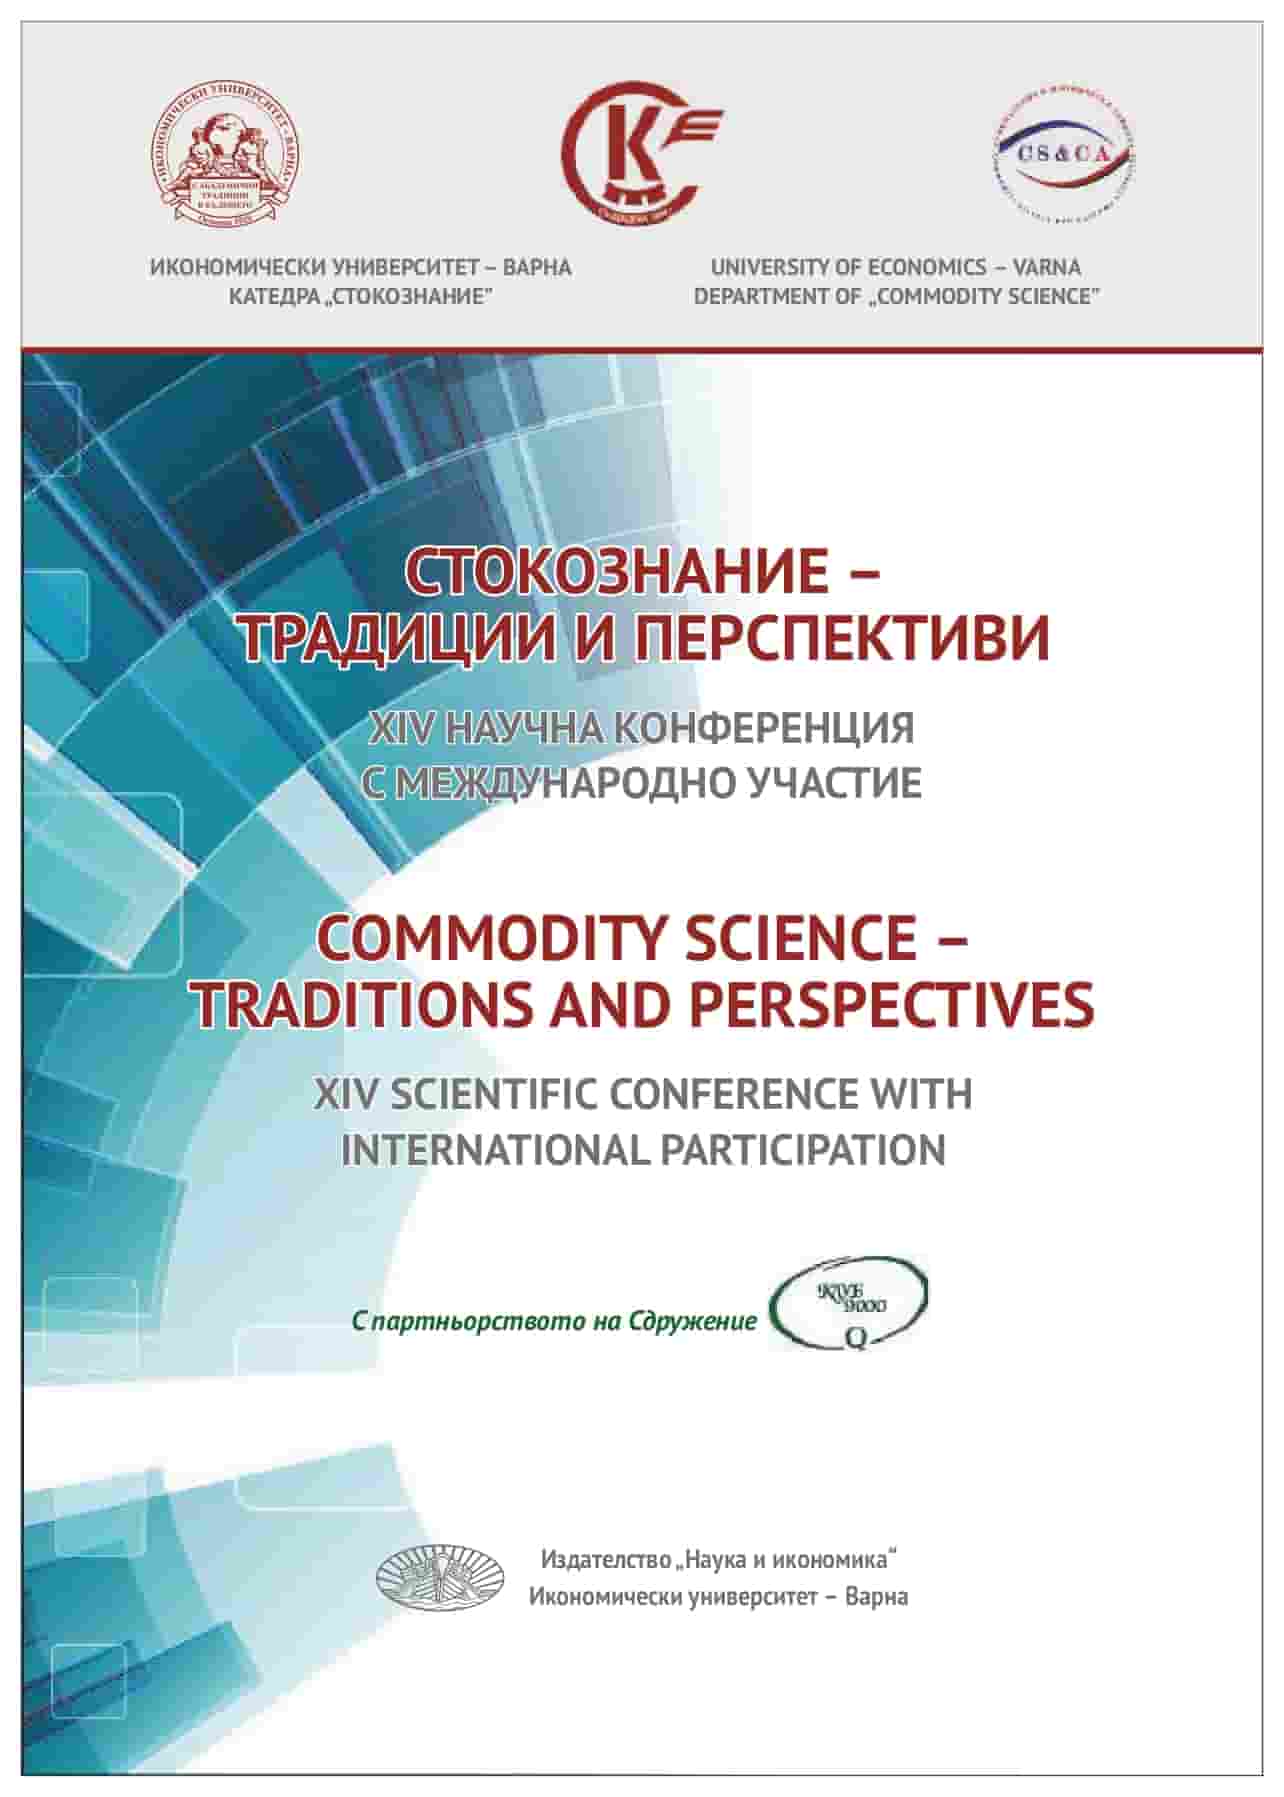 HISTORICAL ASPECTS AND ACTUALITY OF THE TRAINING AT "COMMODITY SCIENCE" PROGRAM AT UNIVERSITY OF ECONOMICS – VARNA Cover Image